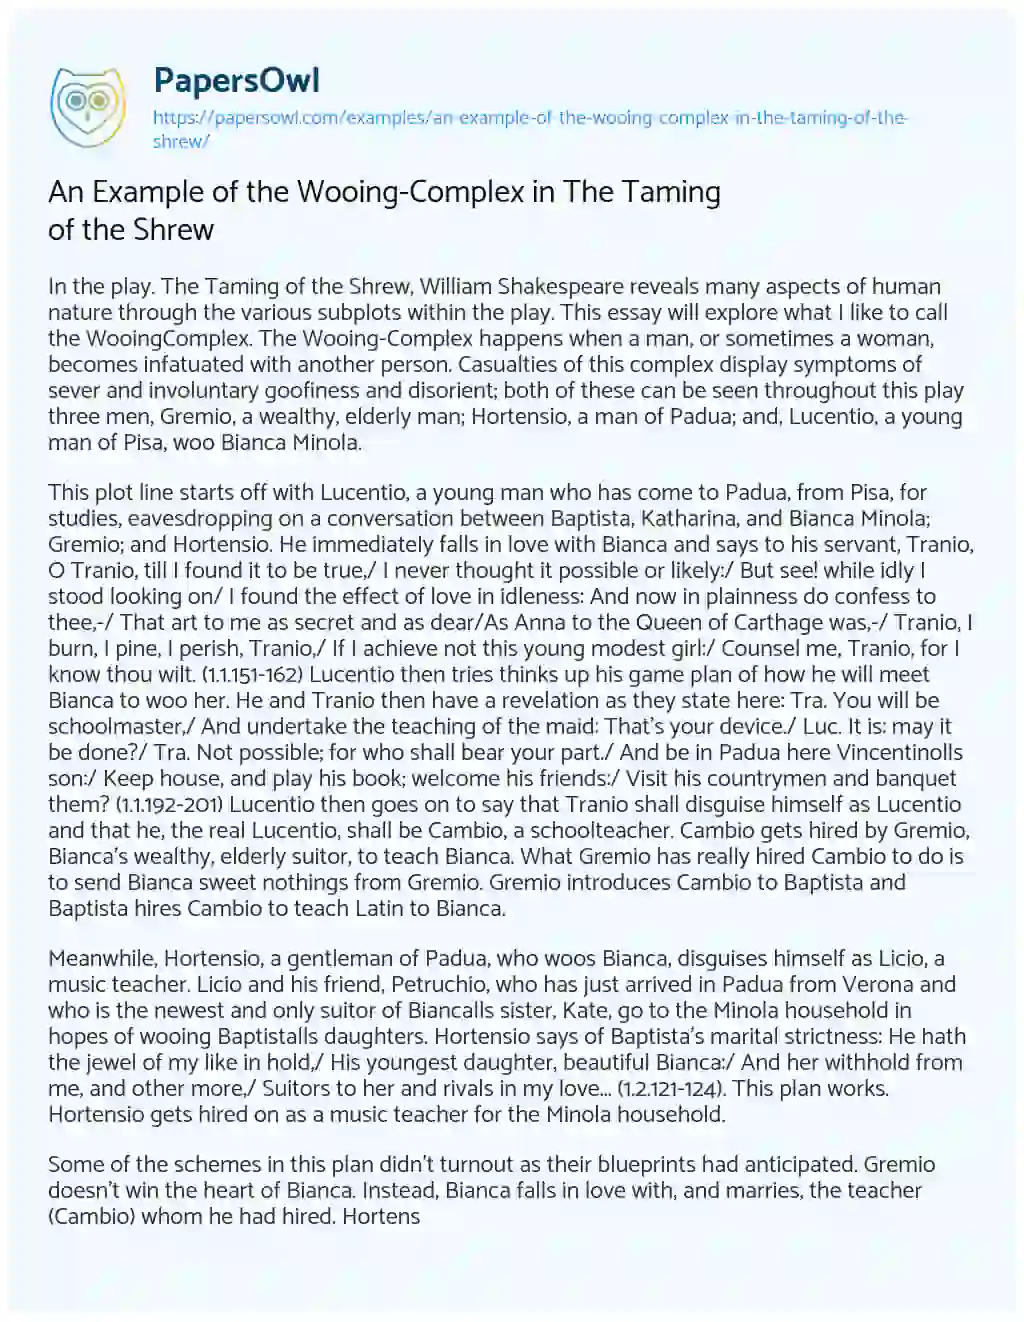 Essay on An Example of the Wooing-Complex in the Taming of the Shrew